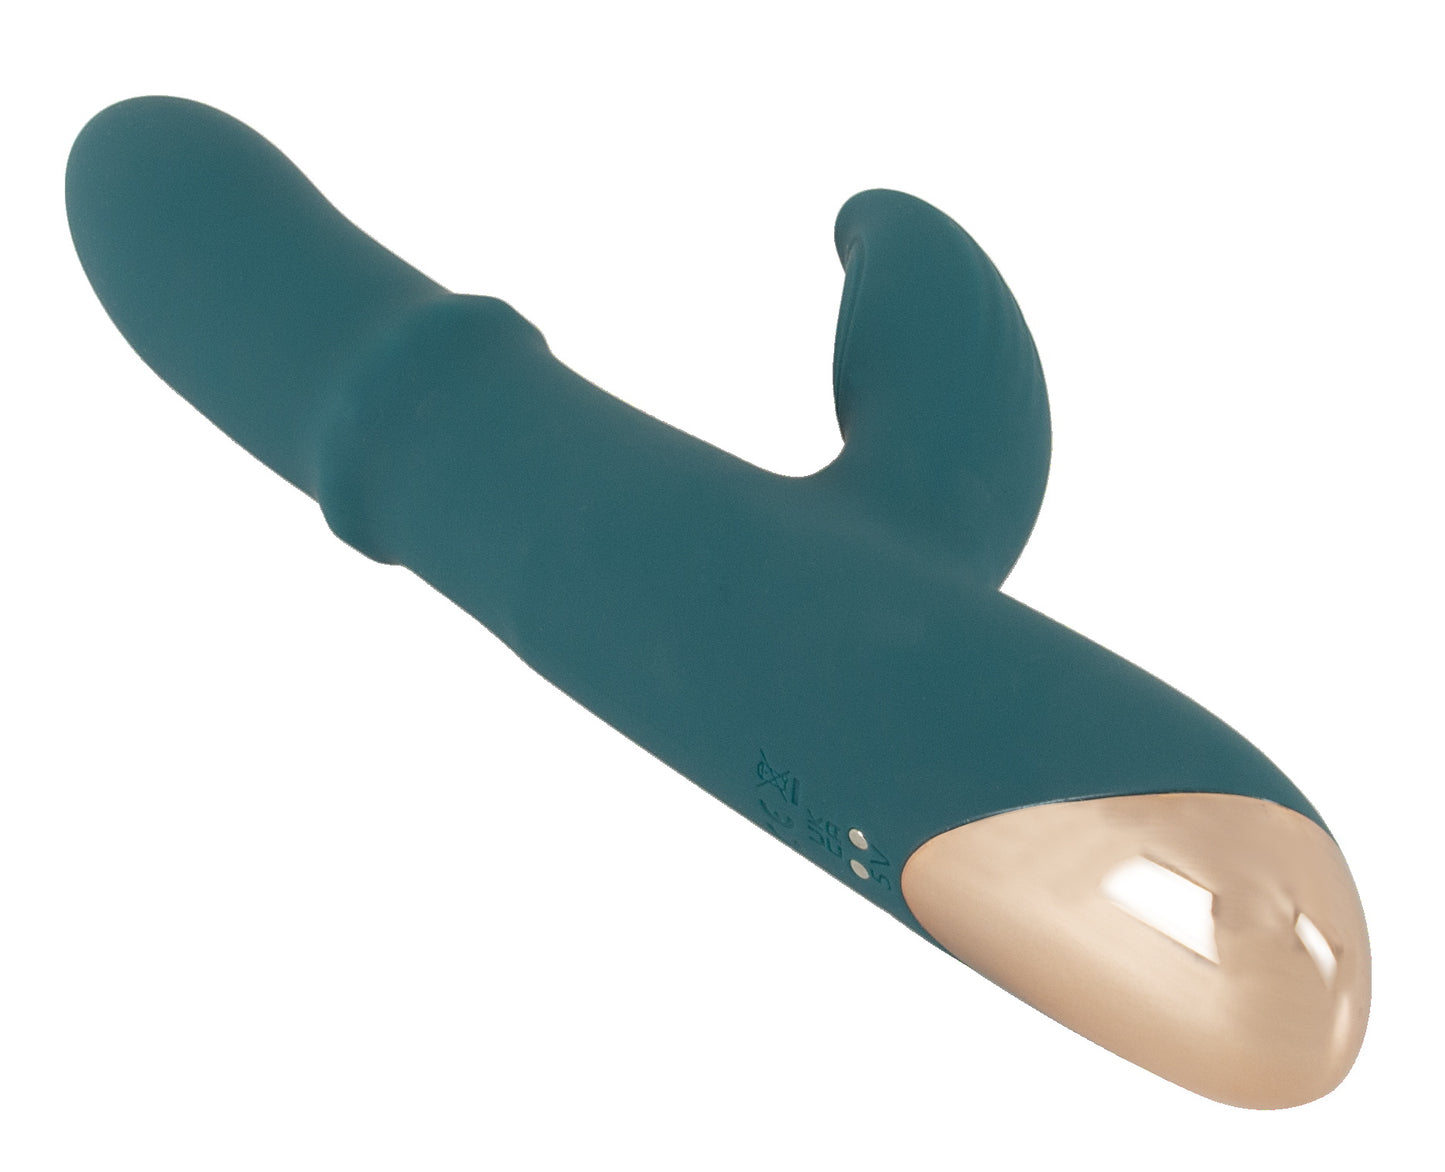 You2Toys Thumping Rabbit Vibrator with Moving Ring